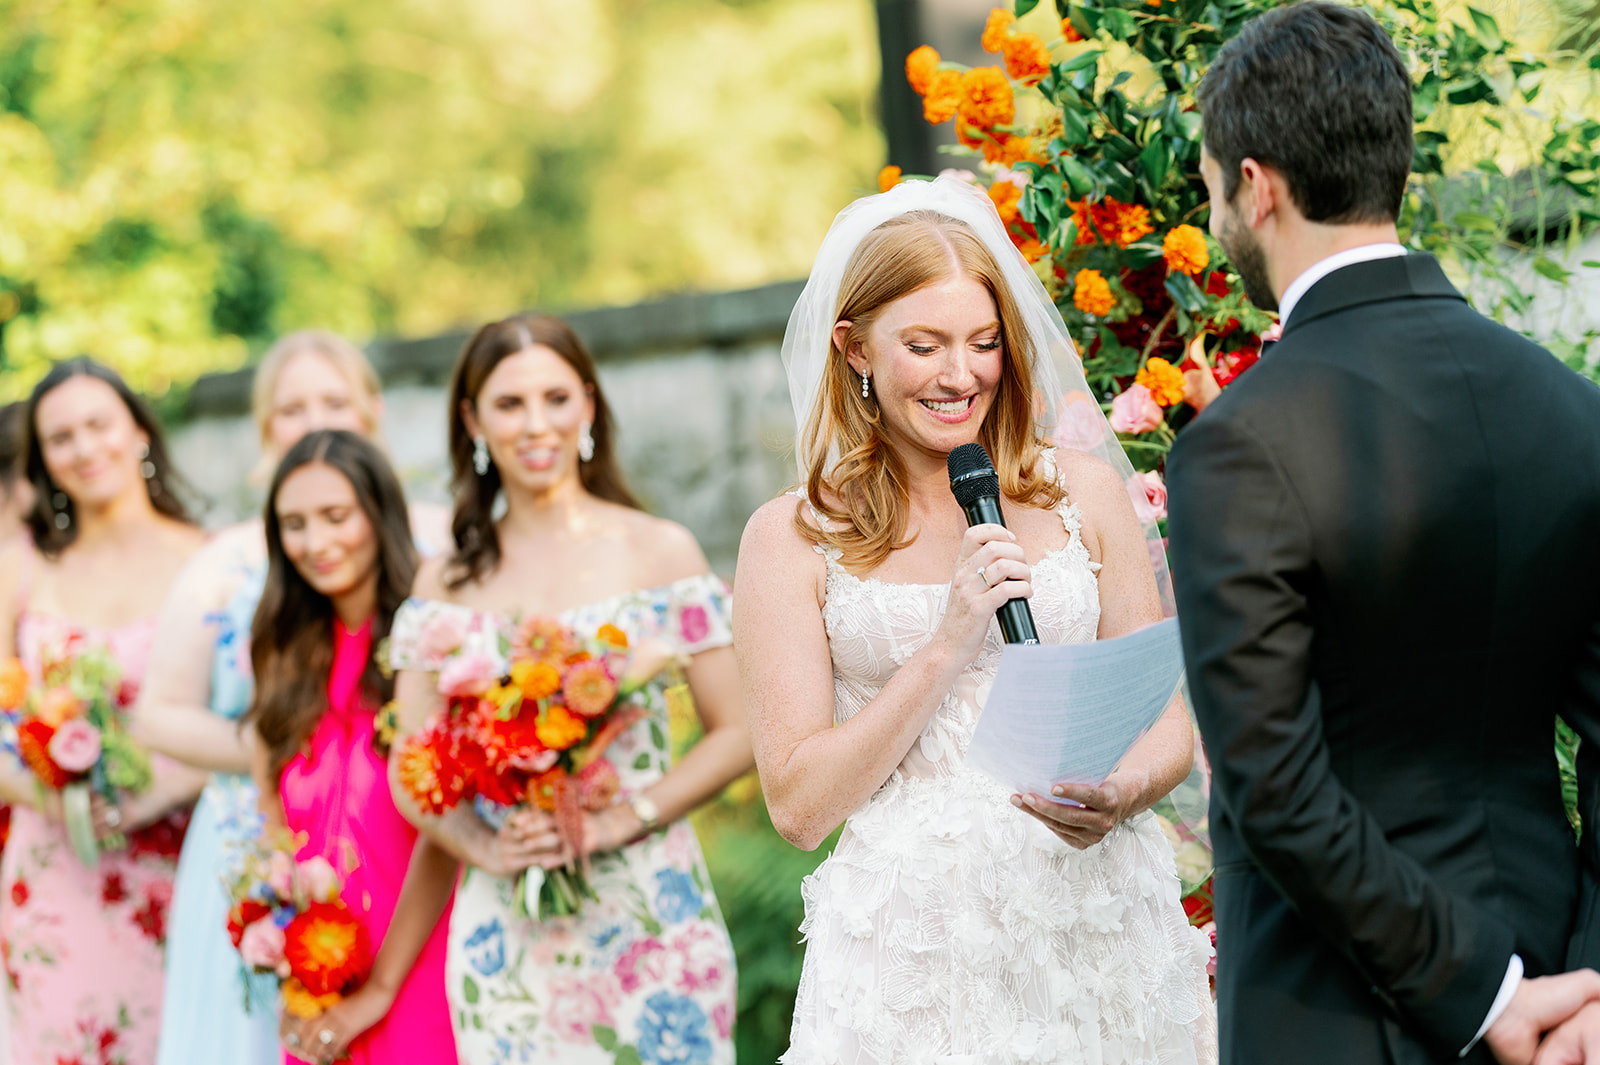 Bride saying her vows during a garden wedding ceremony with her bridesmaids in the background.